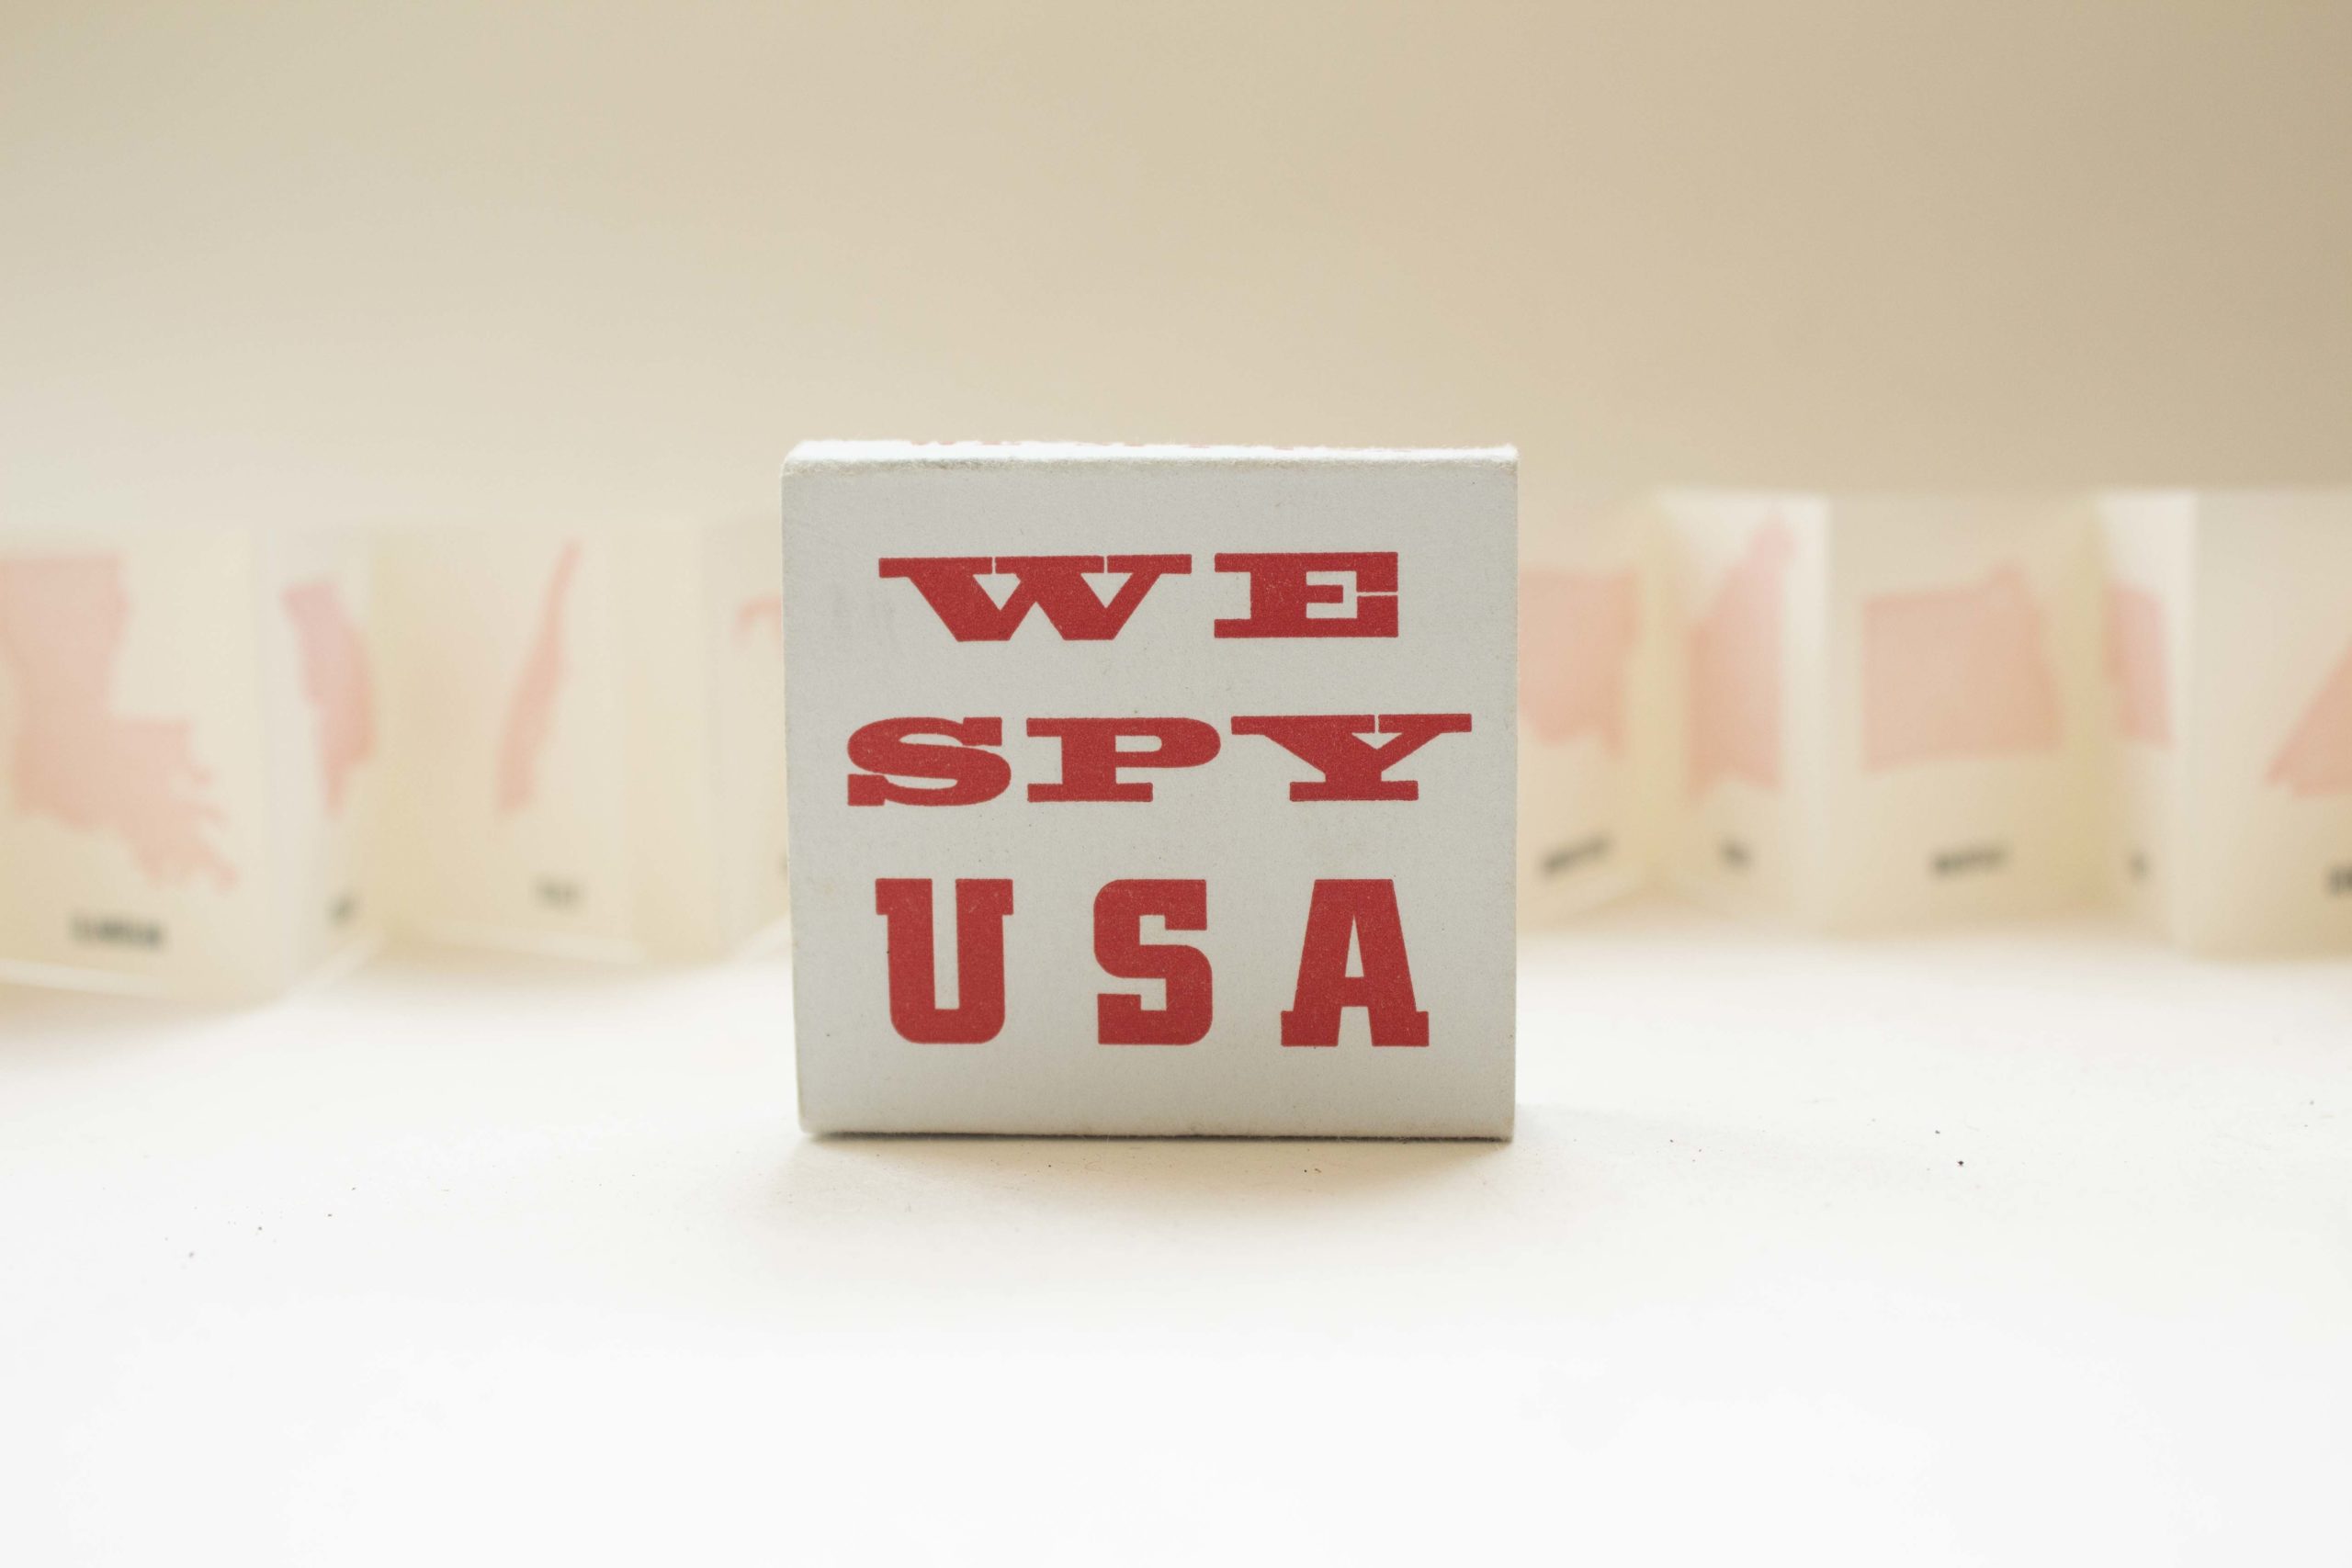 2"x2" book with the words we spy u.s.a. in red on the cover